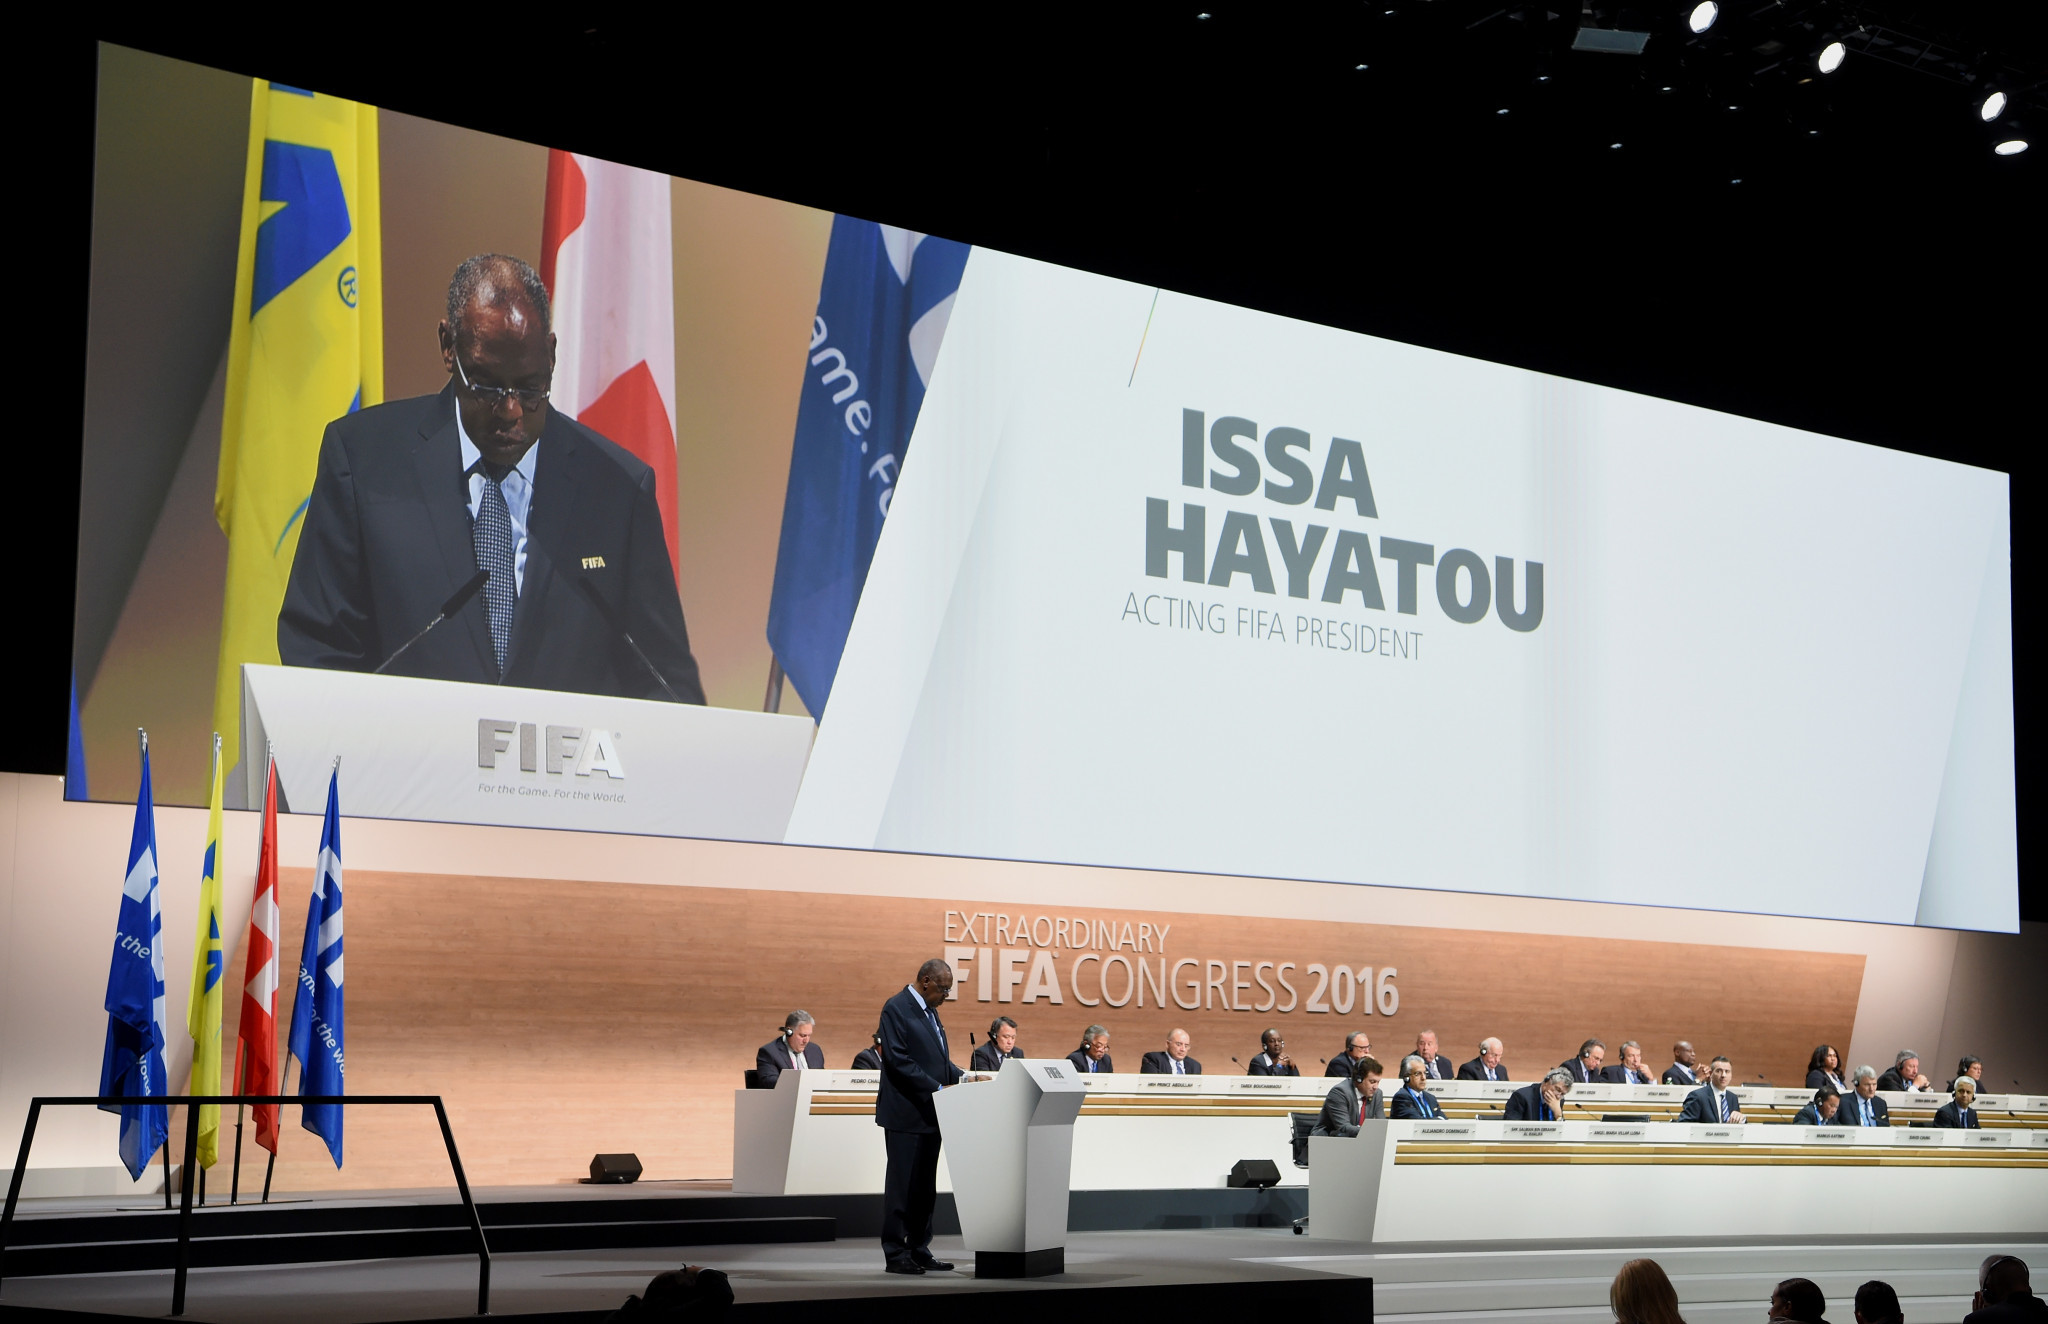 Issa Hayatou was Acting President of FIFA for a brief period in 2015 and 2016 but the organisation later banned him from football for a year for corruption ©Getty Images